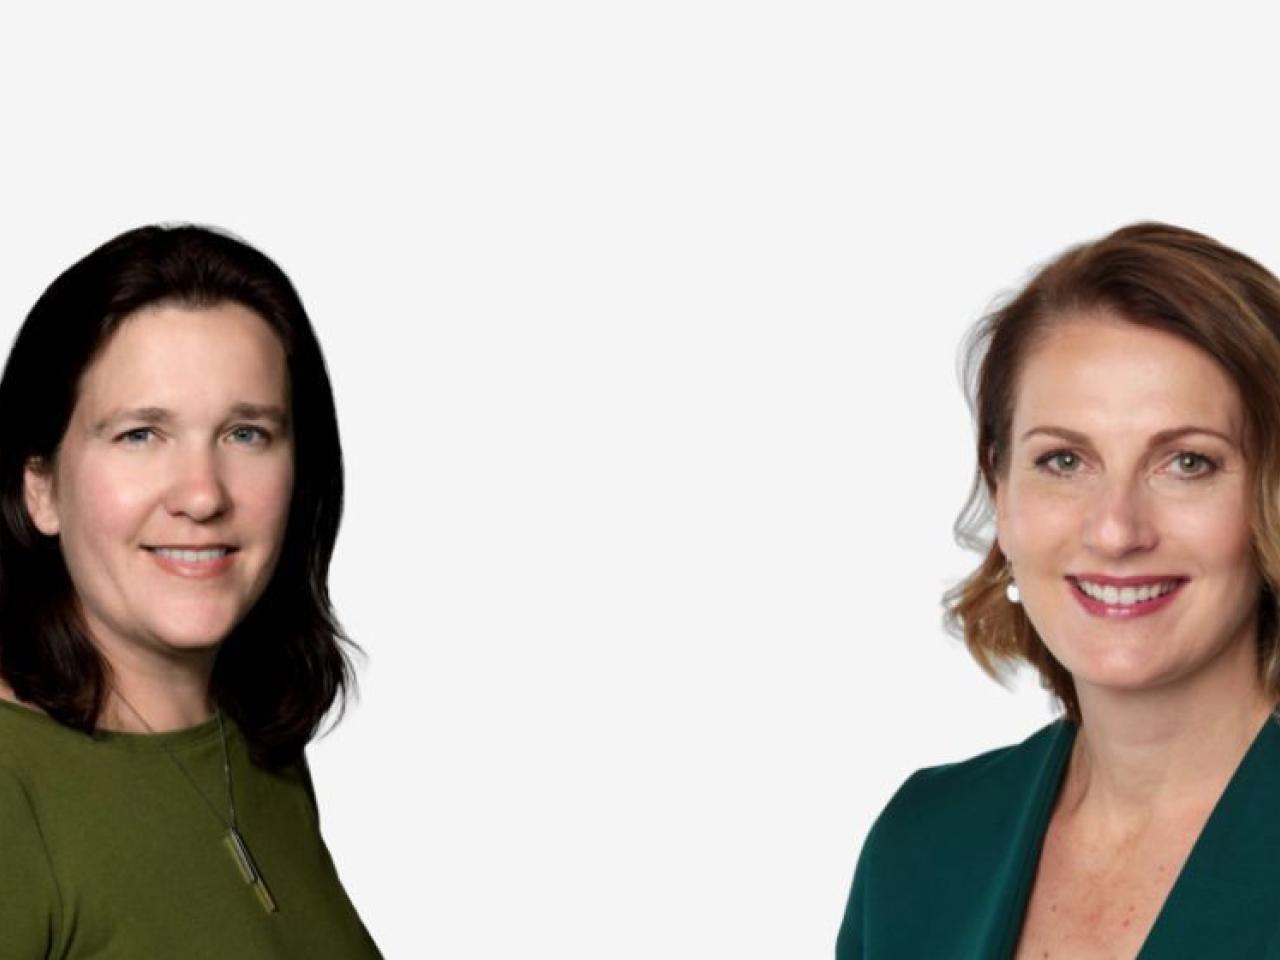  Laura Messerschmitt, General Manager and Vice President of GoDaddy’s International Division, and Tamara Oppen, Vice President English Markets